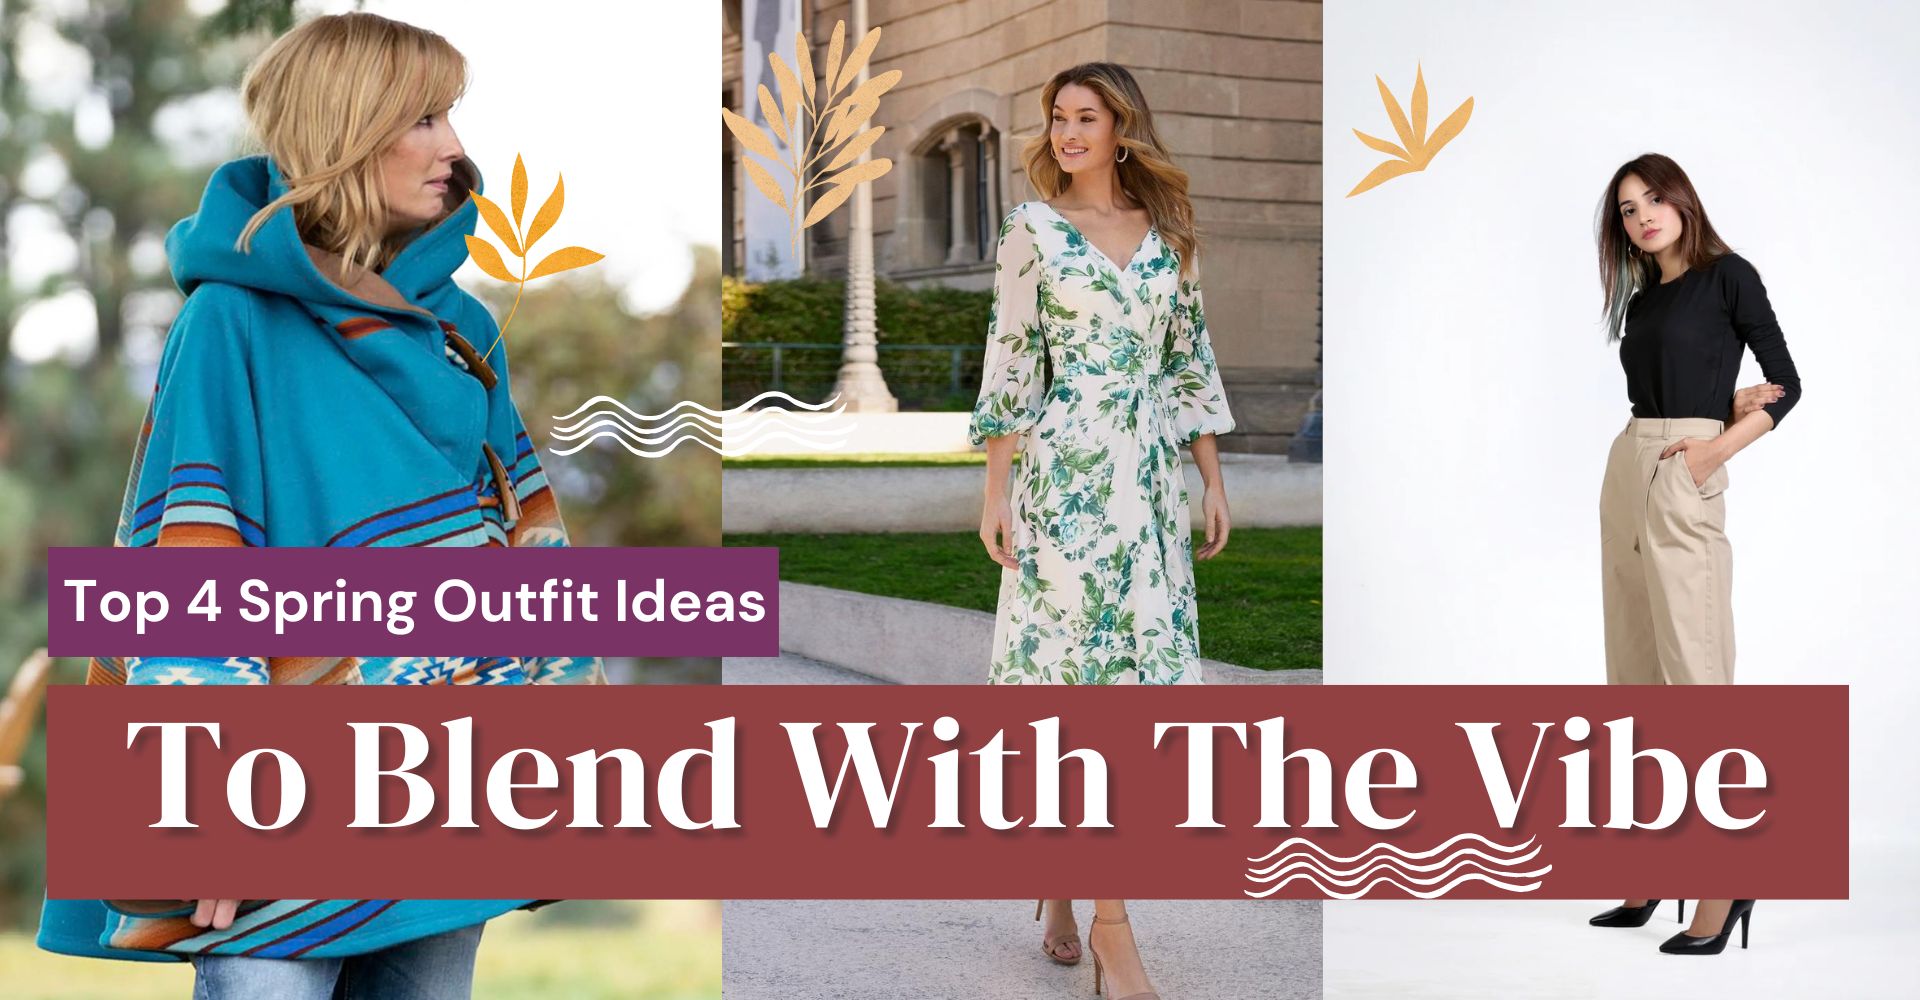 Top-4-spring-outfit-ideas-to-blend-with-the-vibe